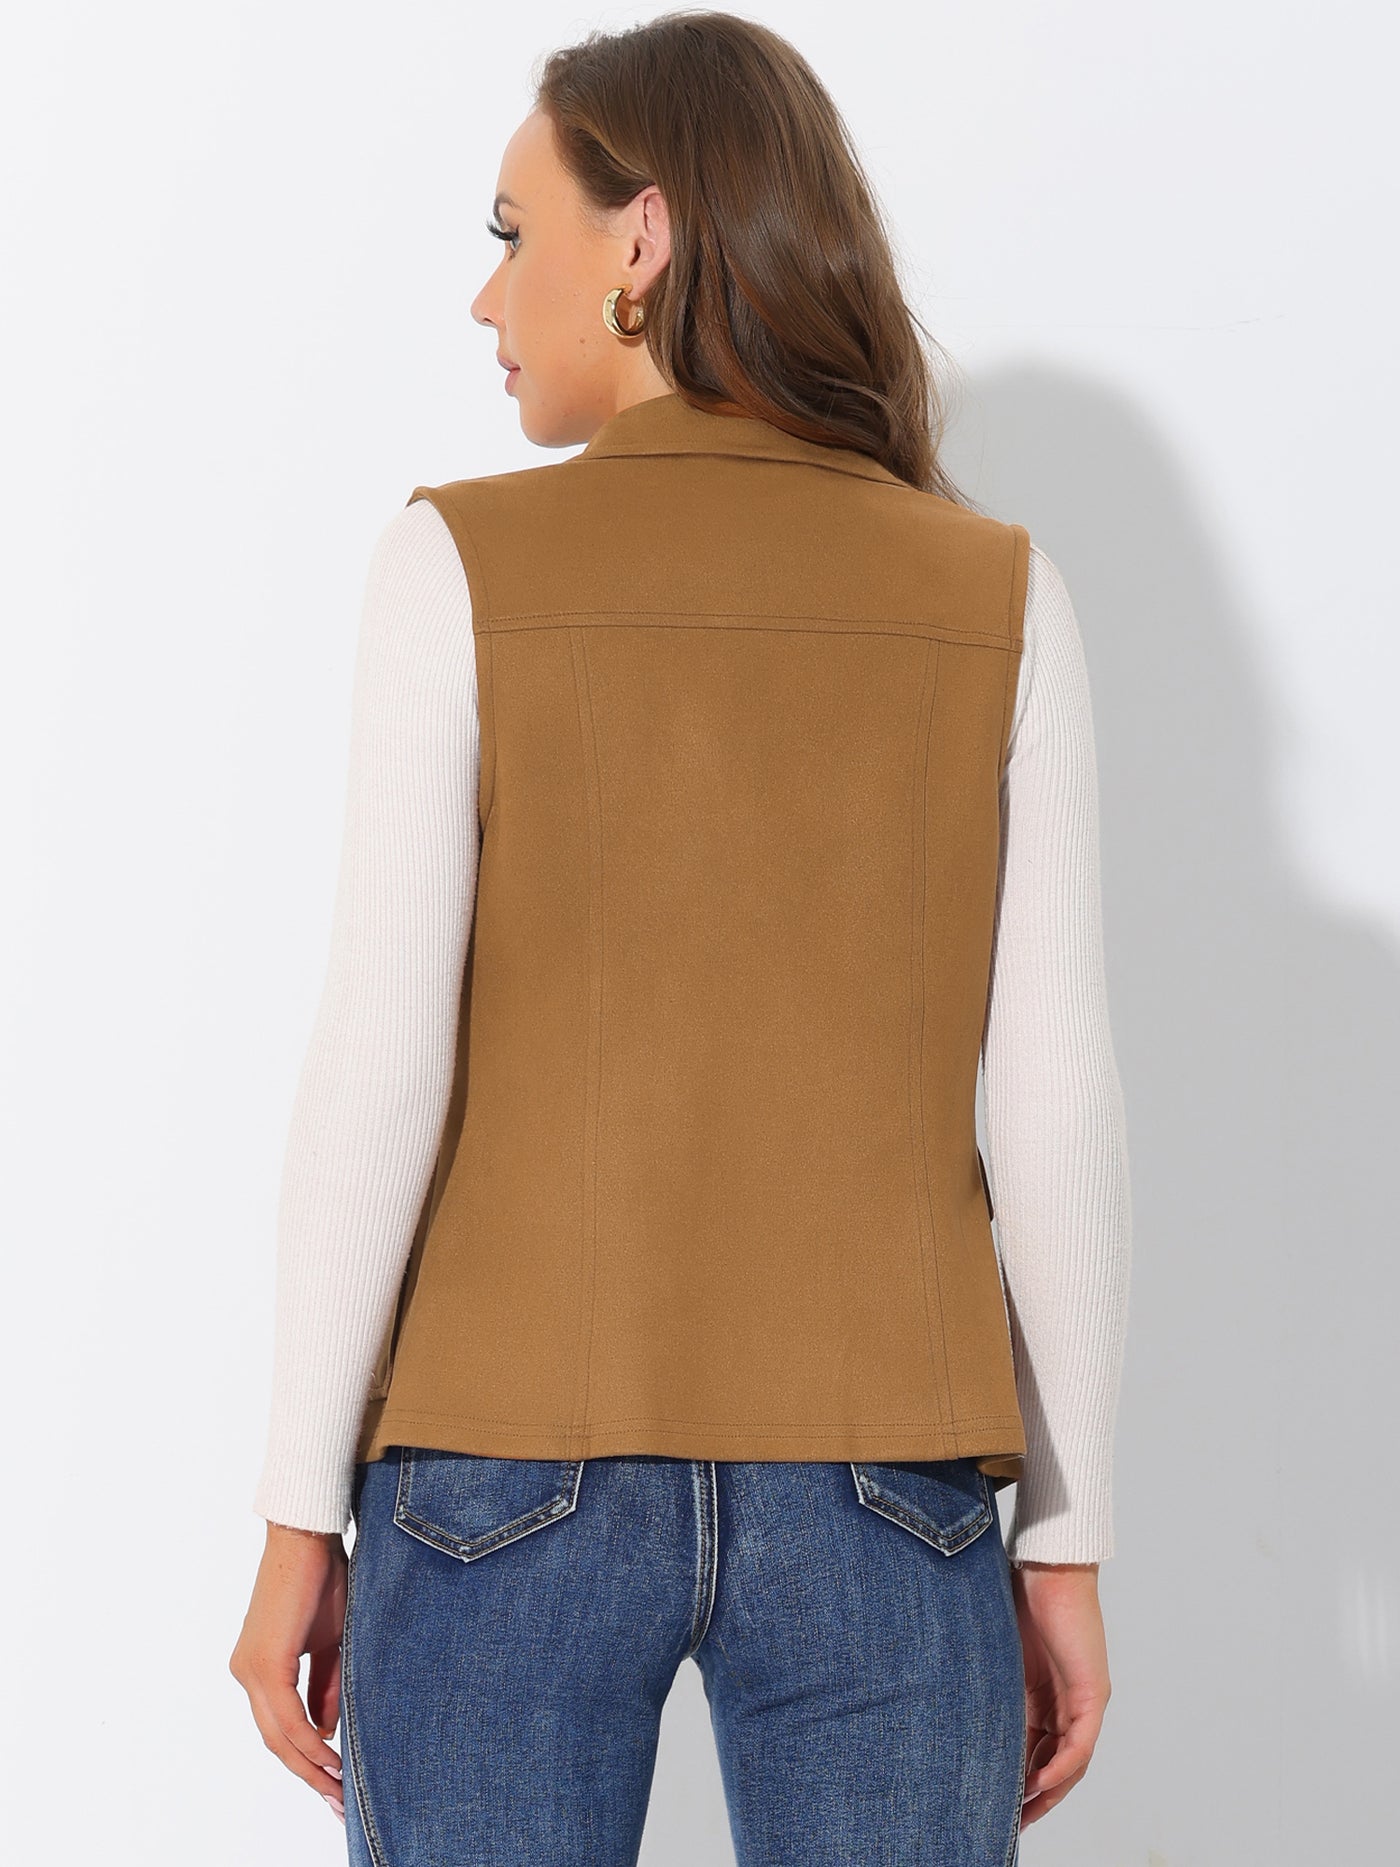 Allegra K Faux Suede Vest Utility Buttoned Sleeveless Jacket with Cargo Pocket